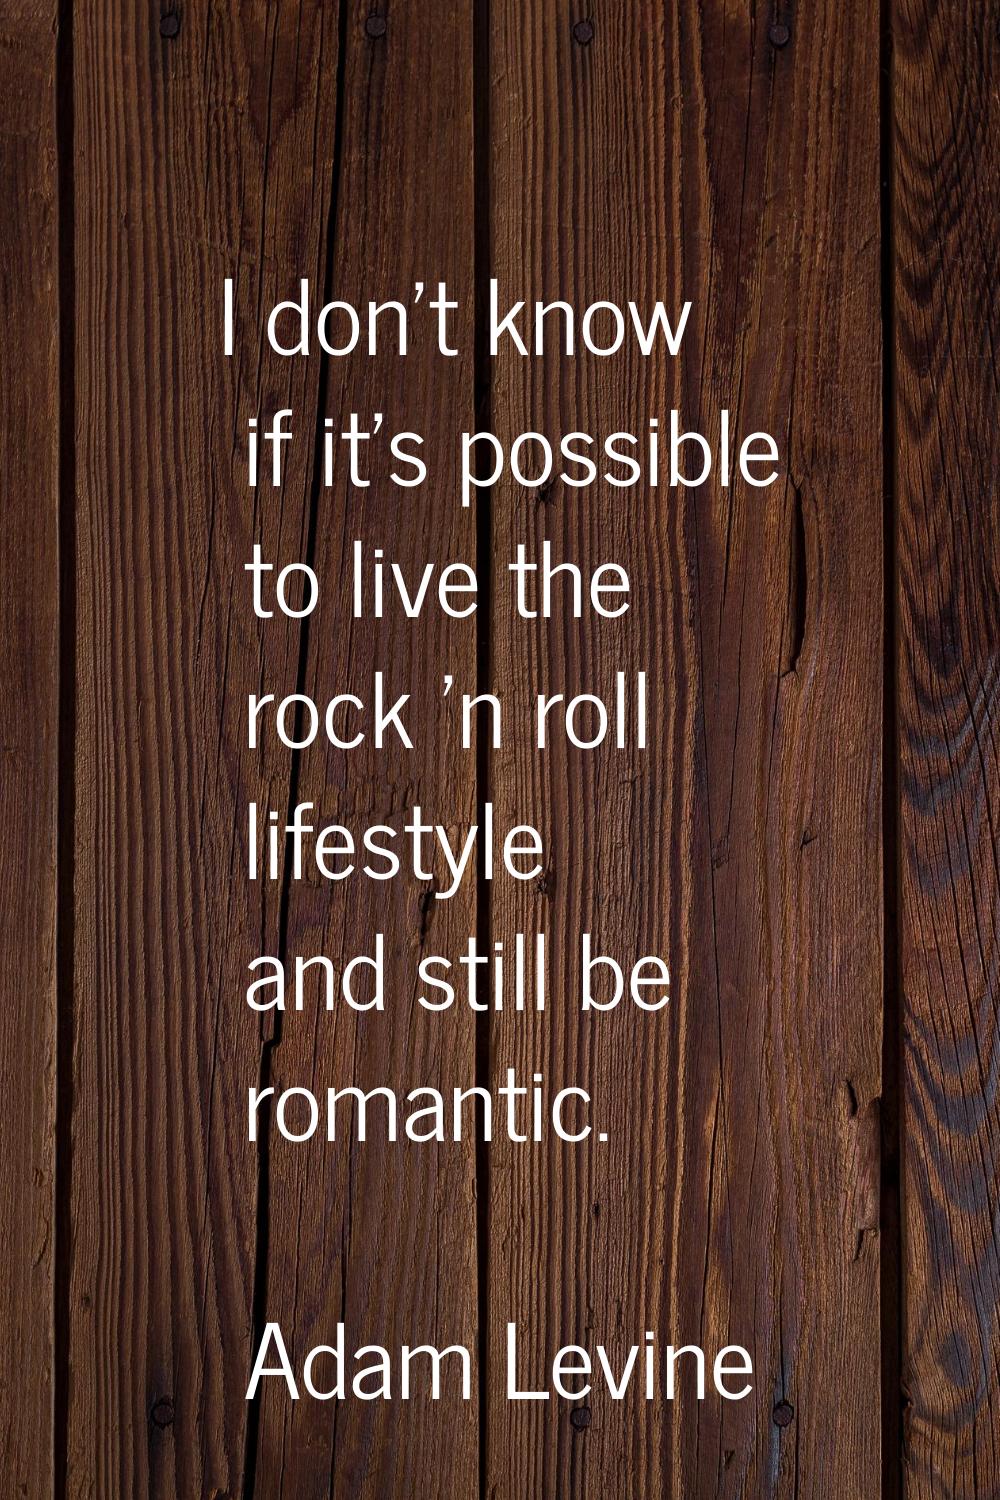 I don't know if it's possible to live the rock 'n roll lifestyle and still be romantic.